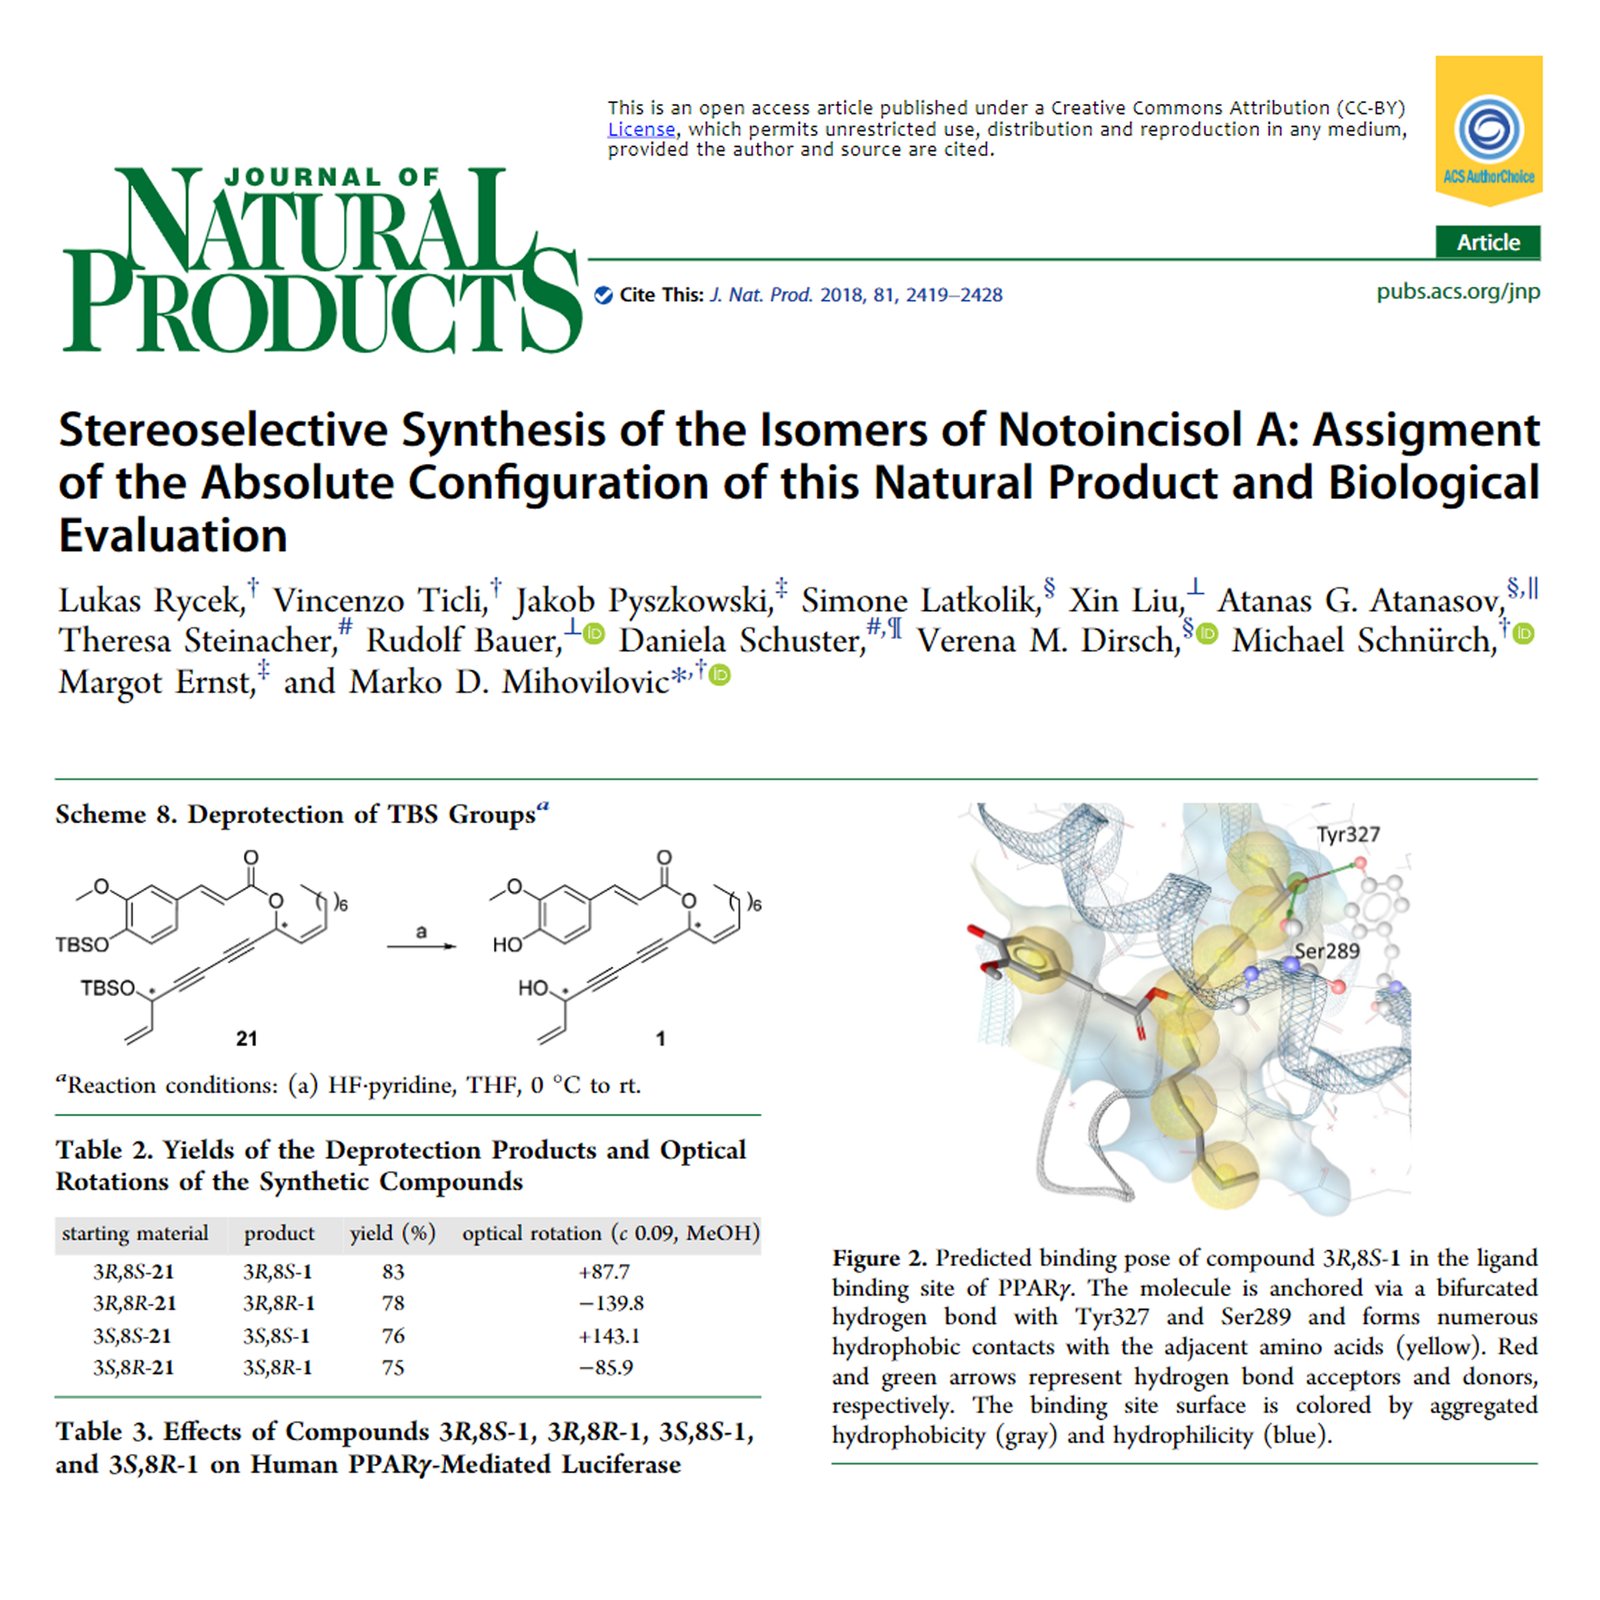 Stereoselective Synthesis of the Isomers of Notoincisol A: Assigment of the Absolute Configuration of this Natural Product and Biological Evaluation